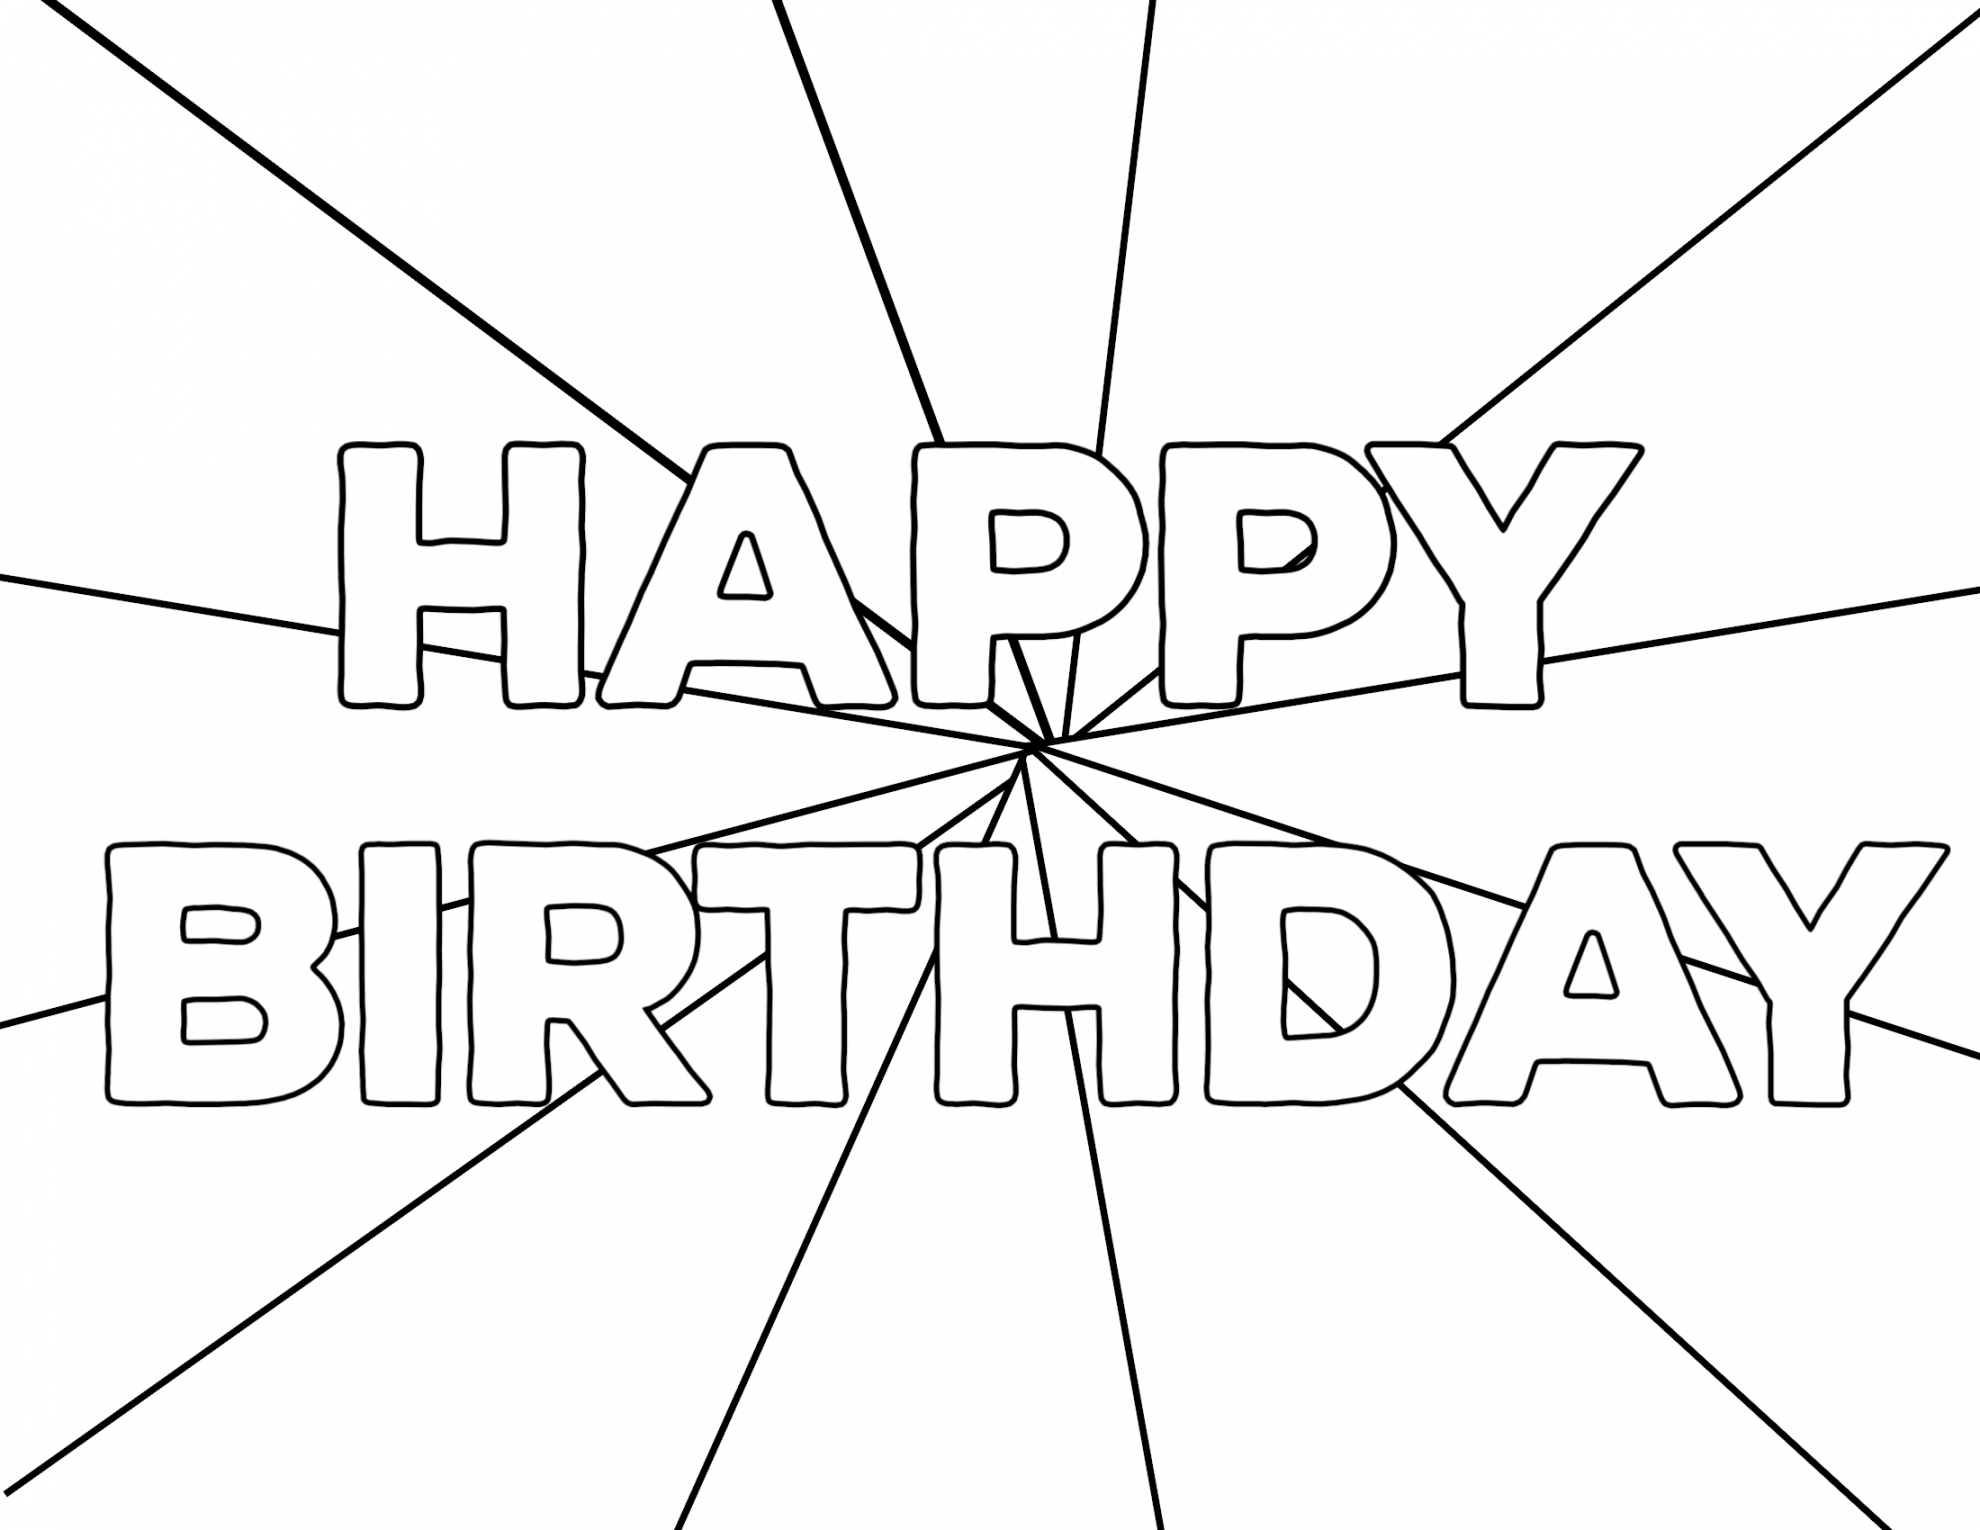 Free Happy Birthday Coloring Pages Printable - Printable - Free Printable Happy Birthday Coloring Pages - Paper Trail Design